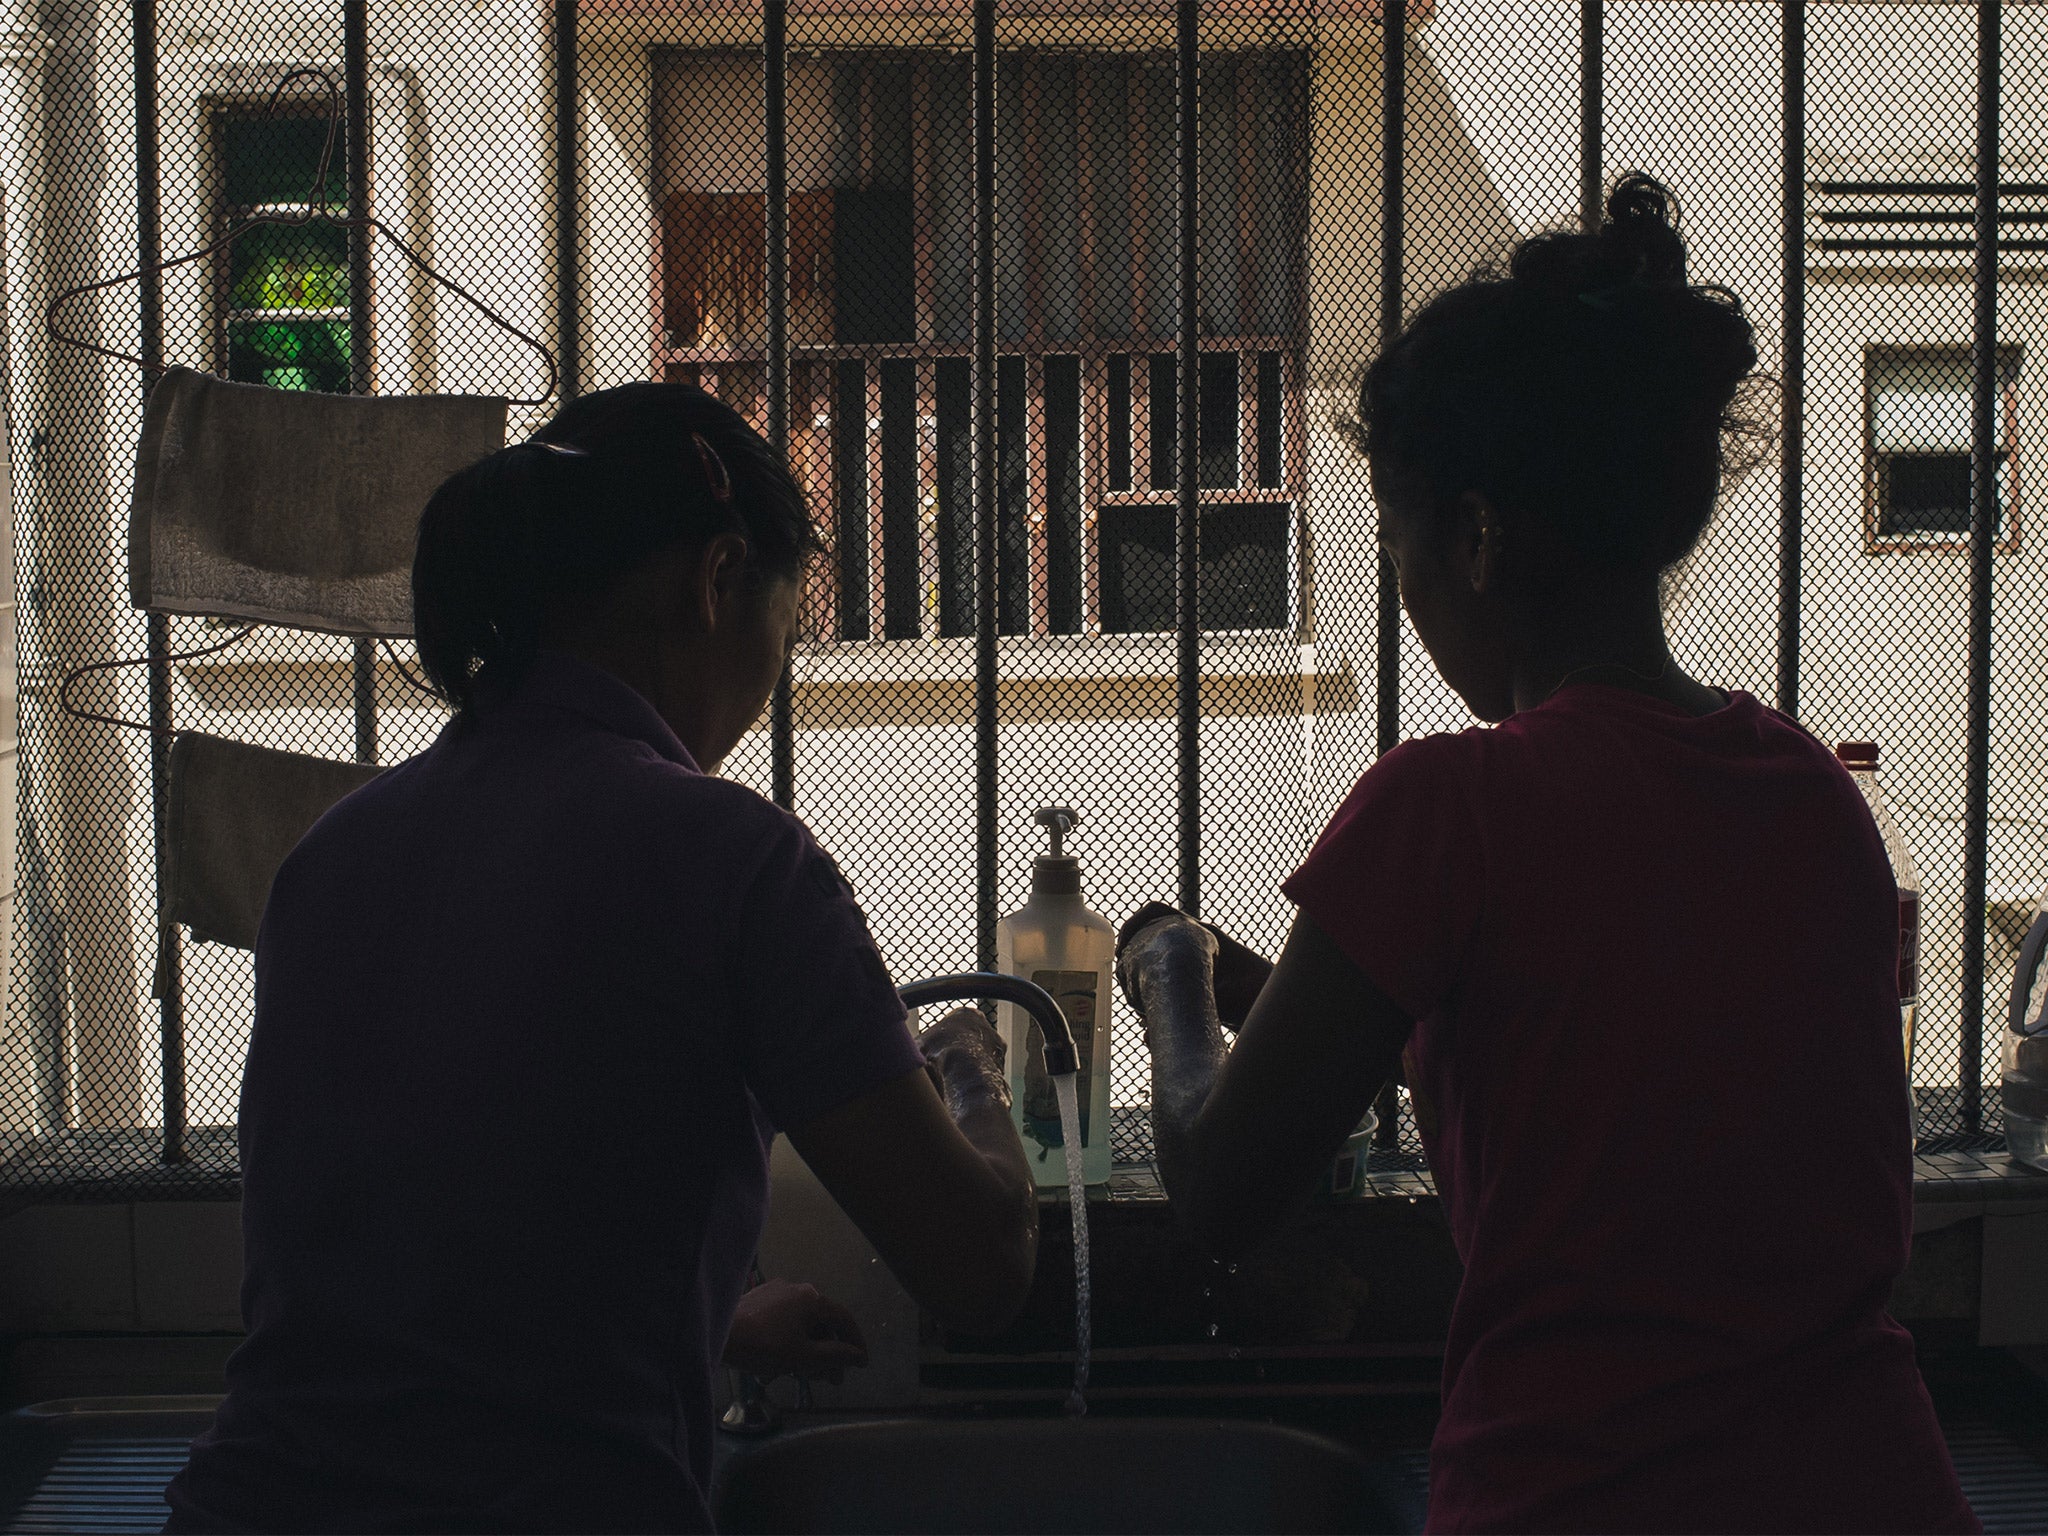 Foreign domestic workers at the Home shelter in Singapore